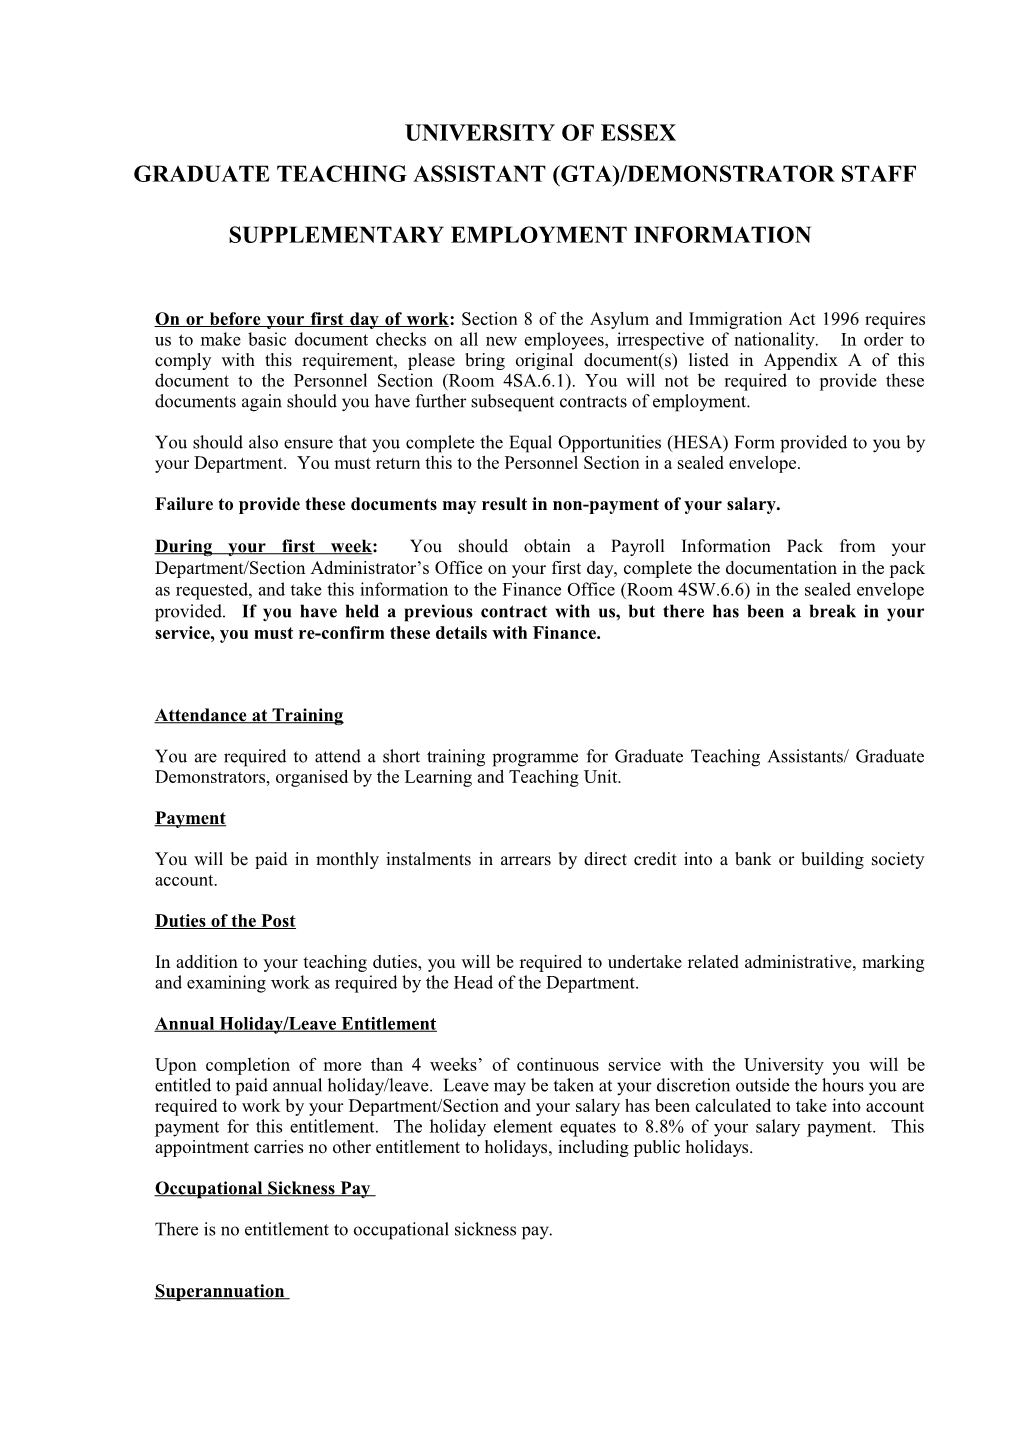 Graduate Teaching Assistant/Demonstrator Staff Terms and Conditions of Employment